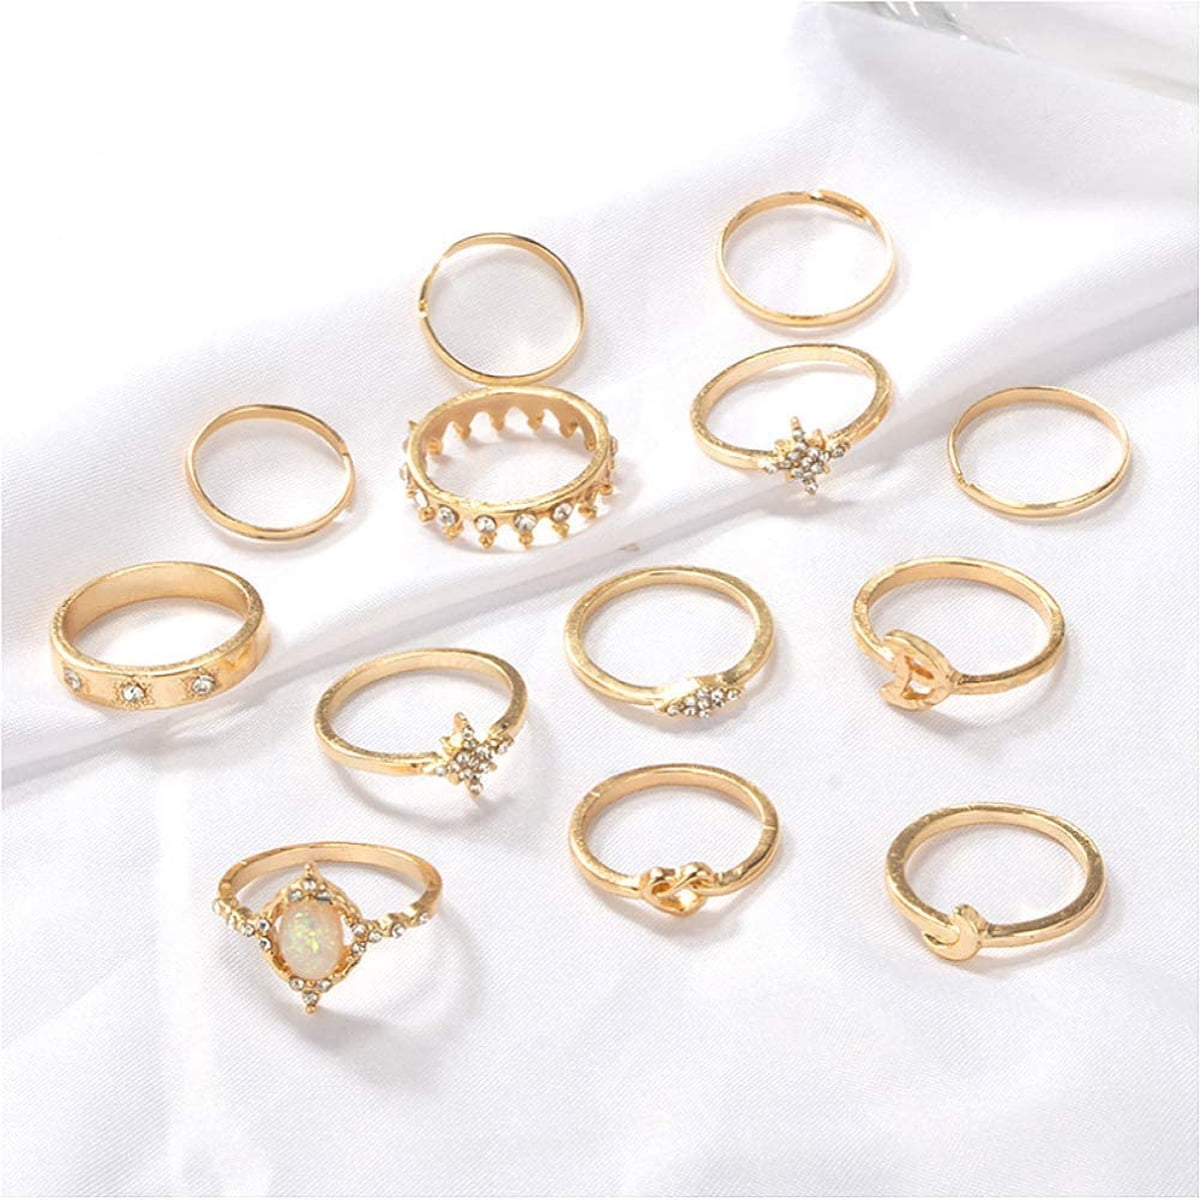 Hayoso Vintage Knuckle Rings Set Stackable Finger Rings Midi Rings for Women Bohemian Stacking Joint Rings for Girls Gold Silver Rings Crystal Joint Rings 